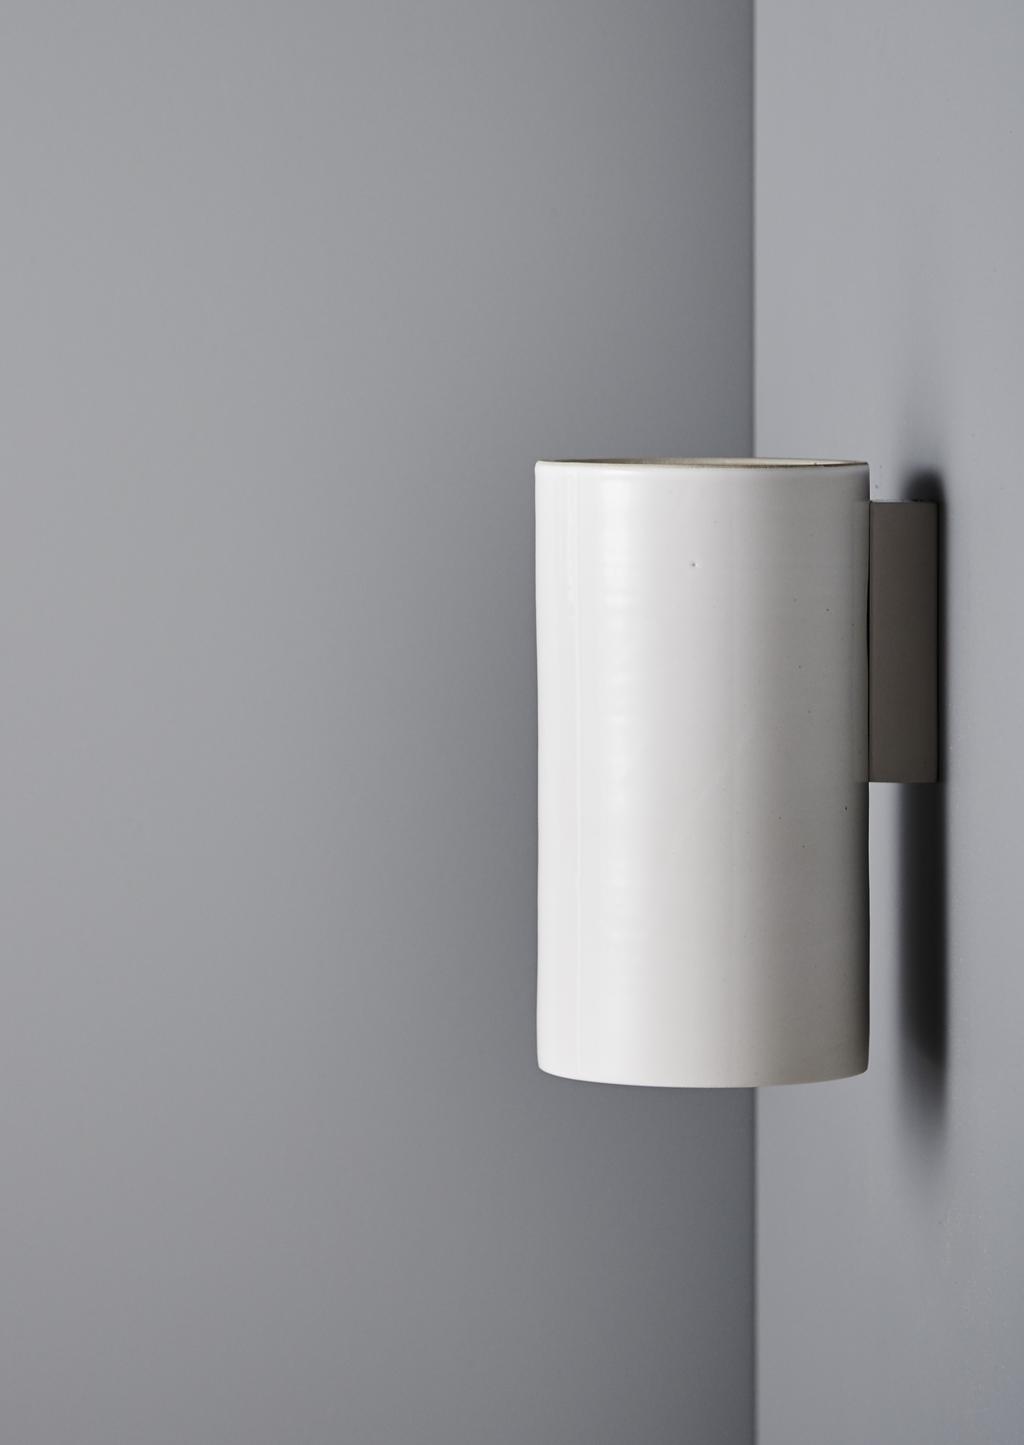 EARTH LIGHT LARGE NEW FOR 2018 120 mm New to the Earth Light range for 2018 is an additional size offering of the wall format fitting.